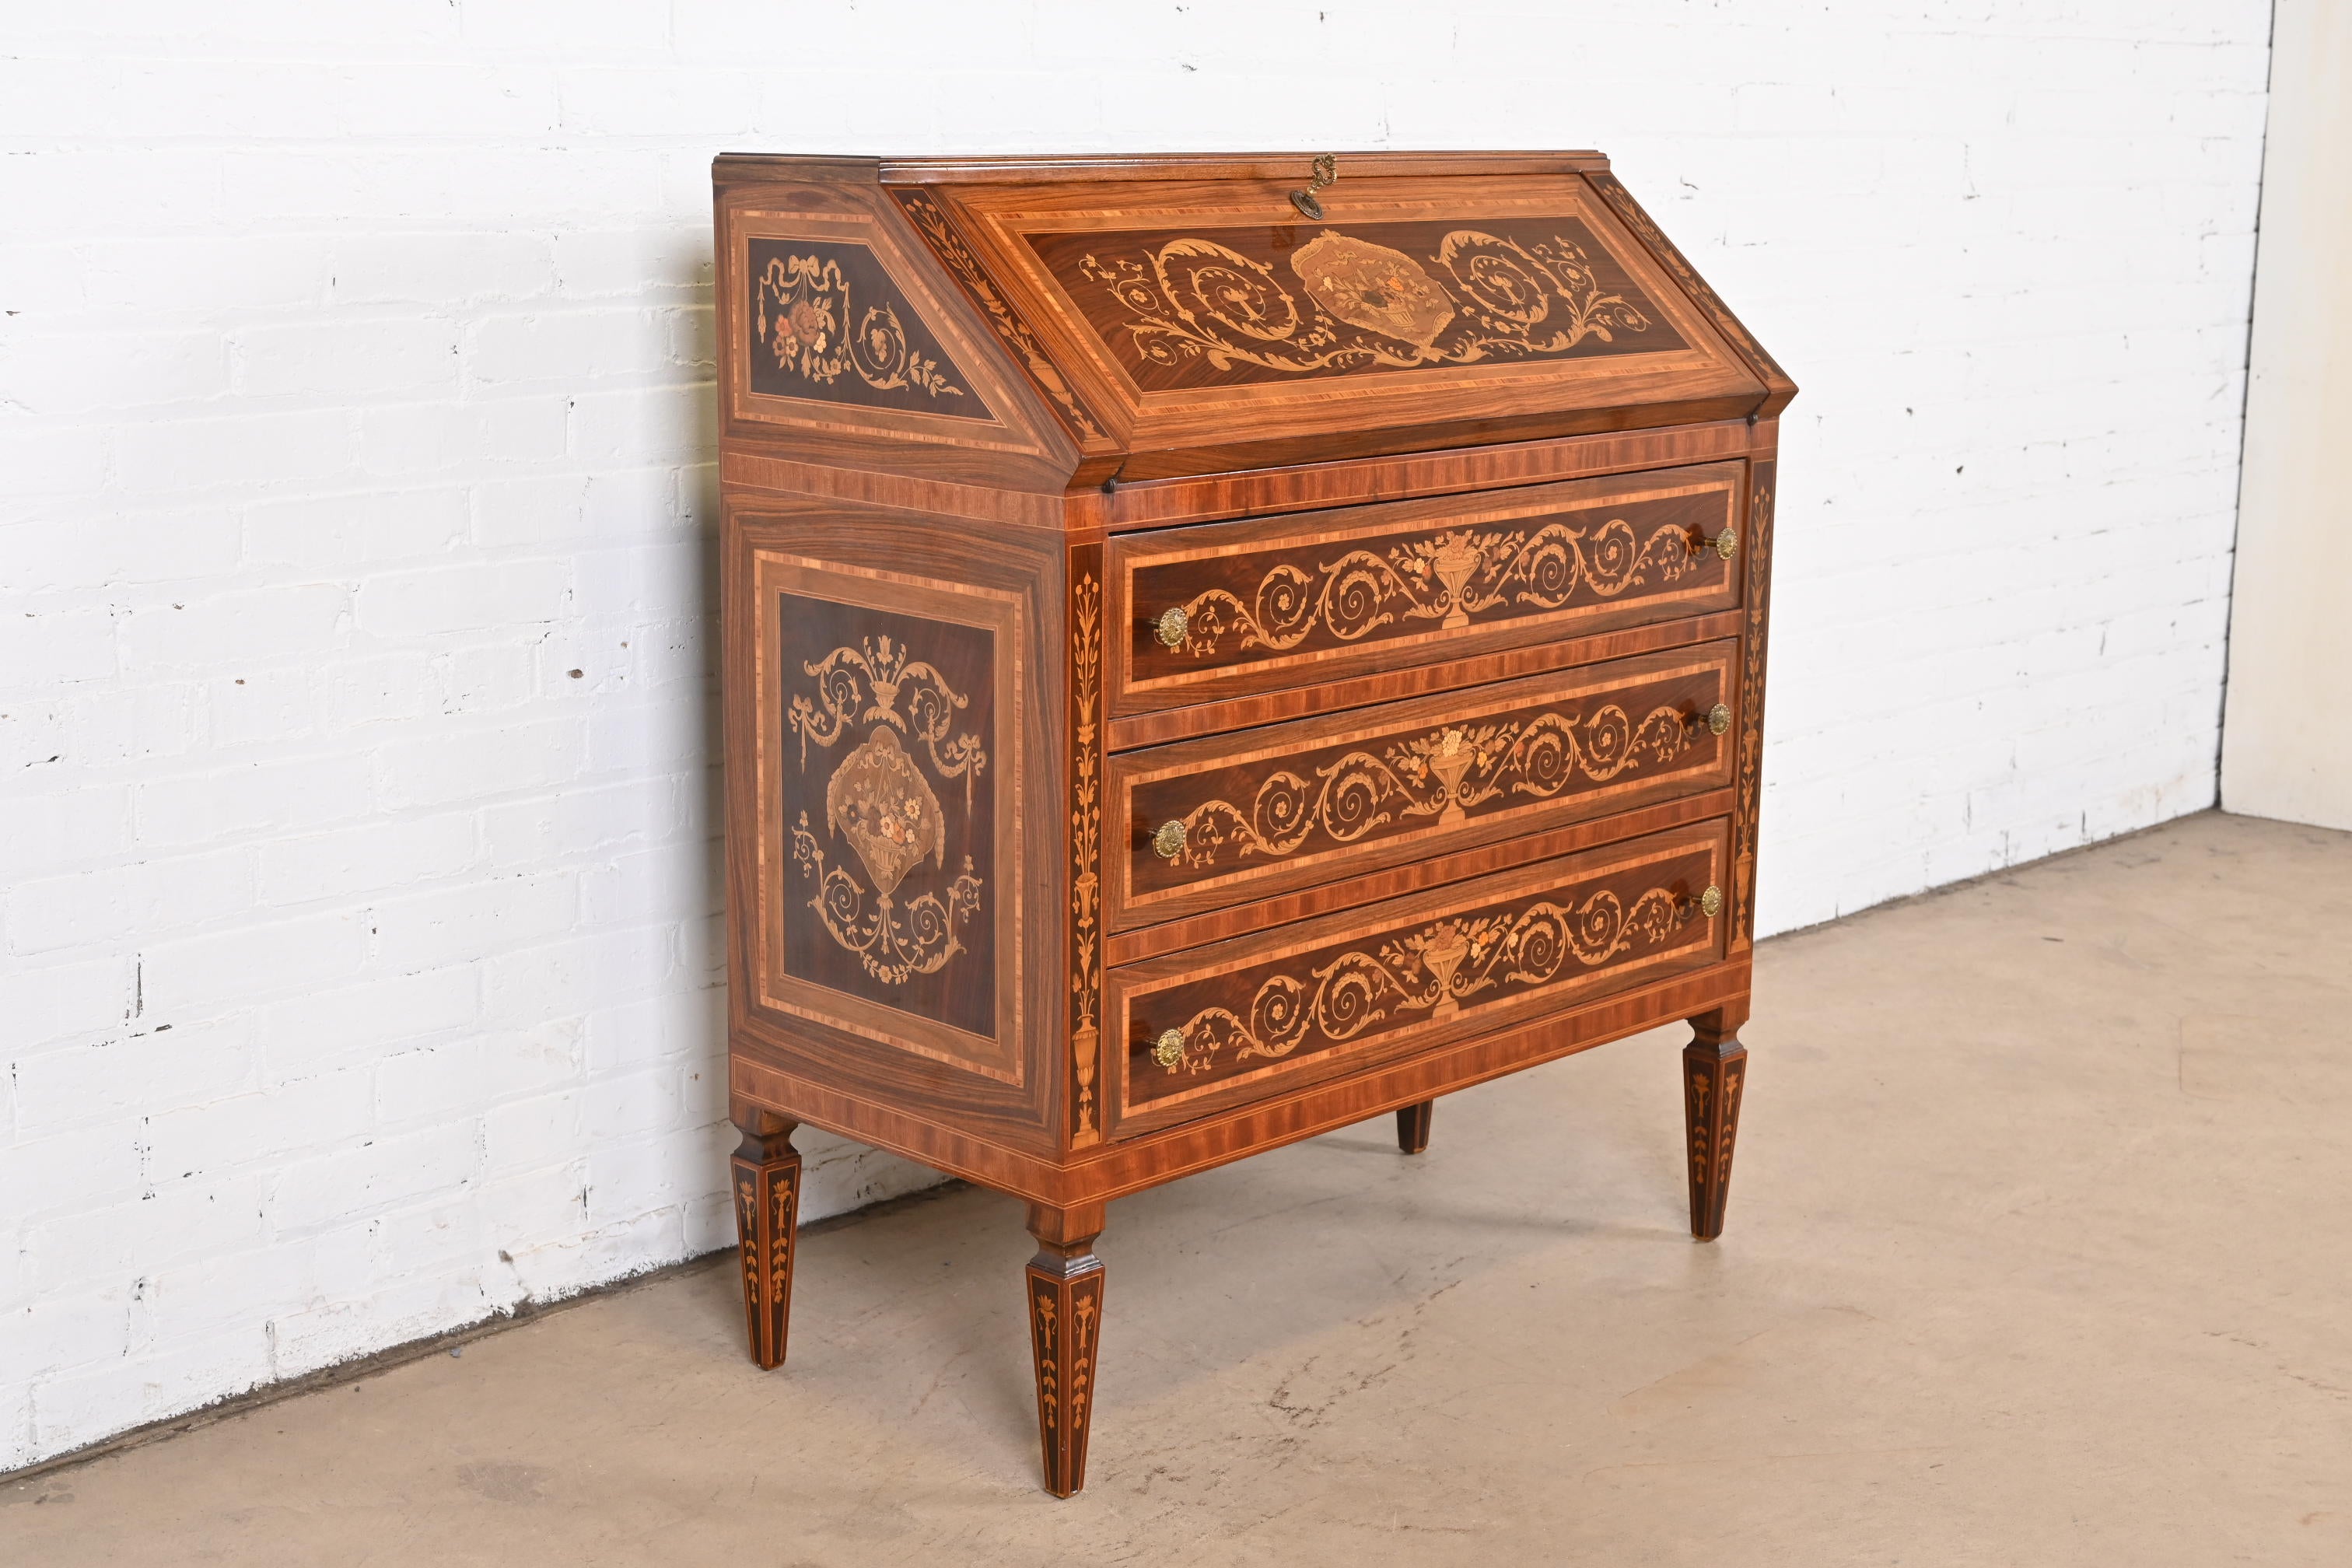 An outstanding Italian Neoclassical style slant front writing desk or secretary desk

Italy, Early 20th Century

Rosewood, with gorgeous mahogany and satinwood marquetry inlay, and original brass hardware. Desk locks, and key is